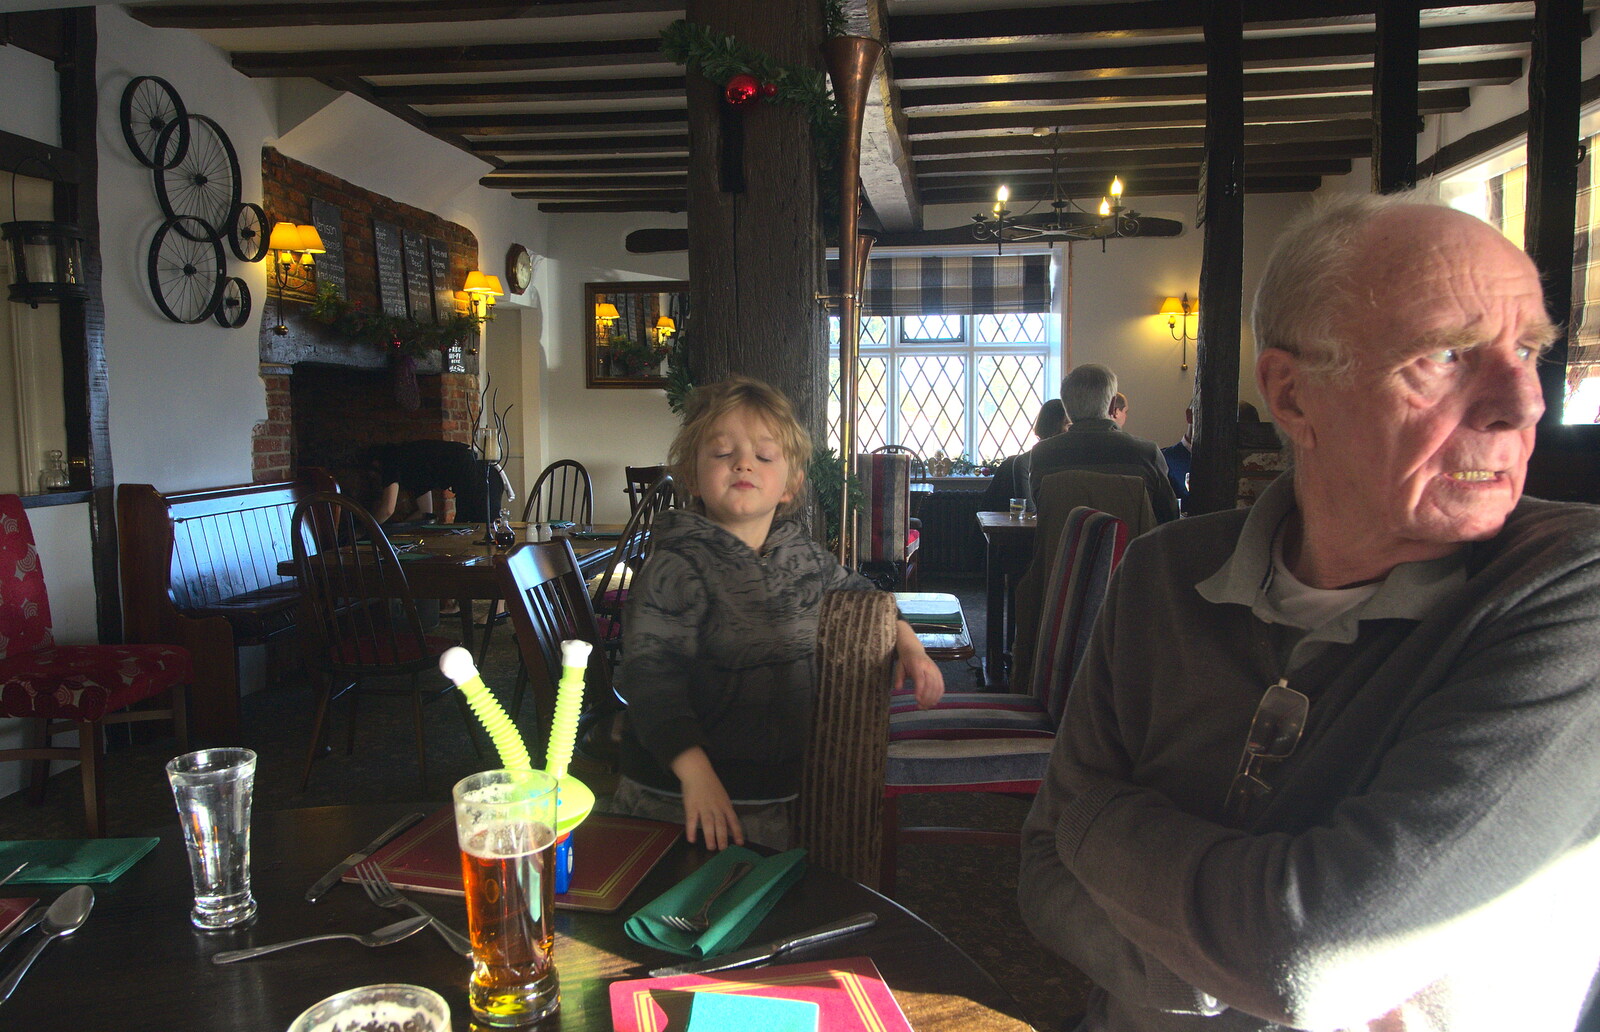 Fred and Grandad in the White Horse from New Year's Day and Lunch at the White Horse, Ipswich, Finningham and Brome - 1st January 2013